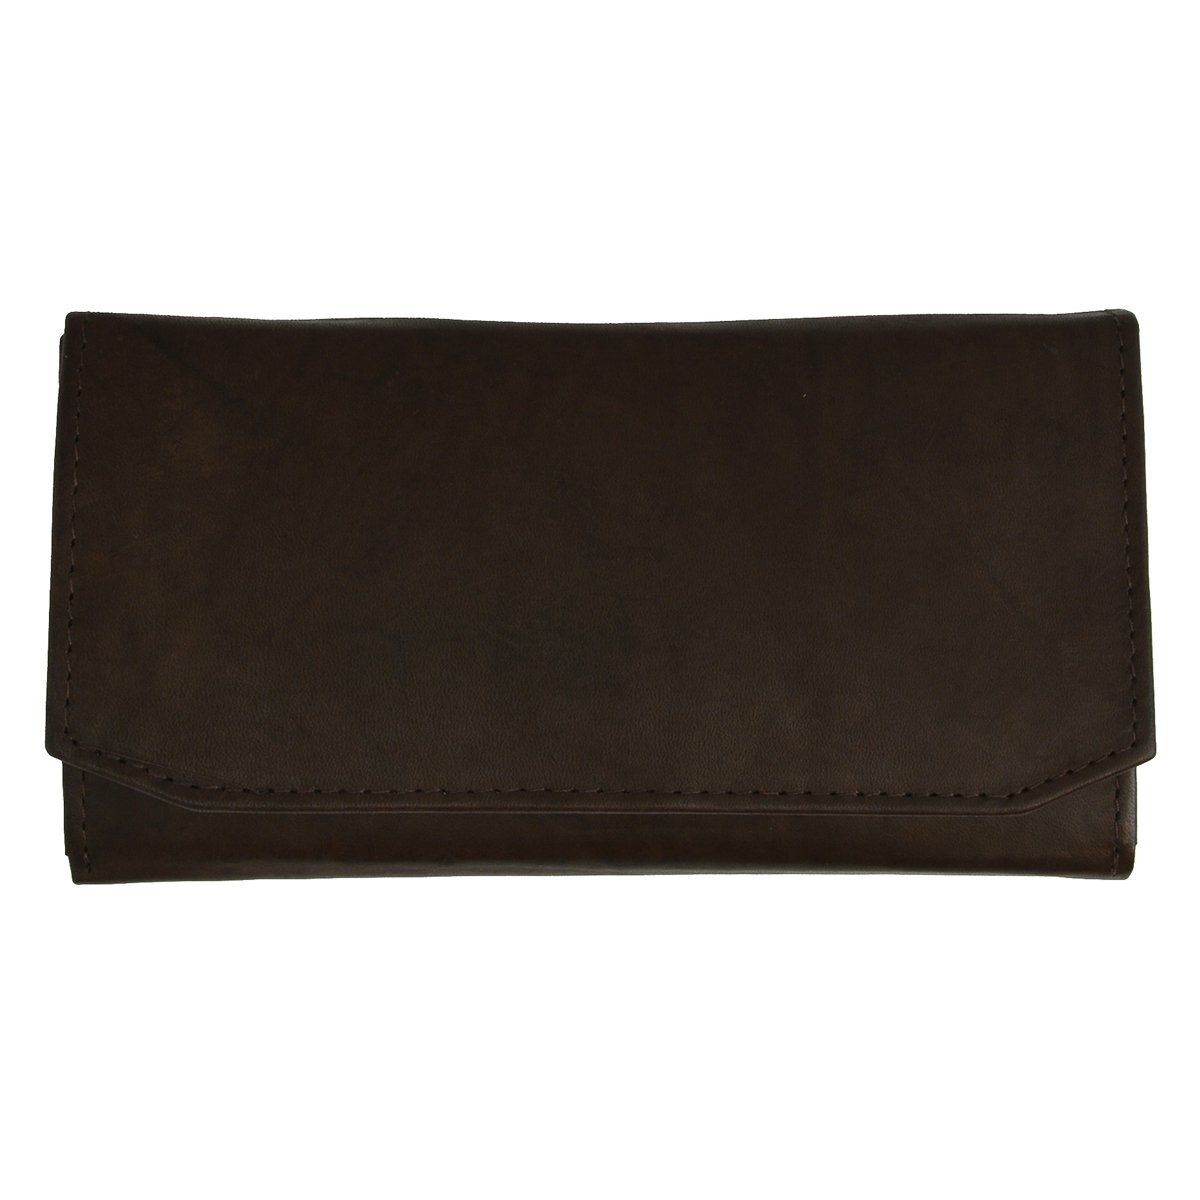 The Timeless Leather Tri-fold Women Wallet